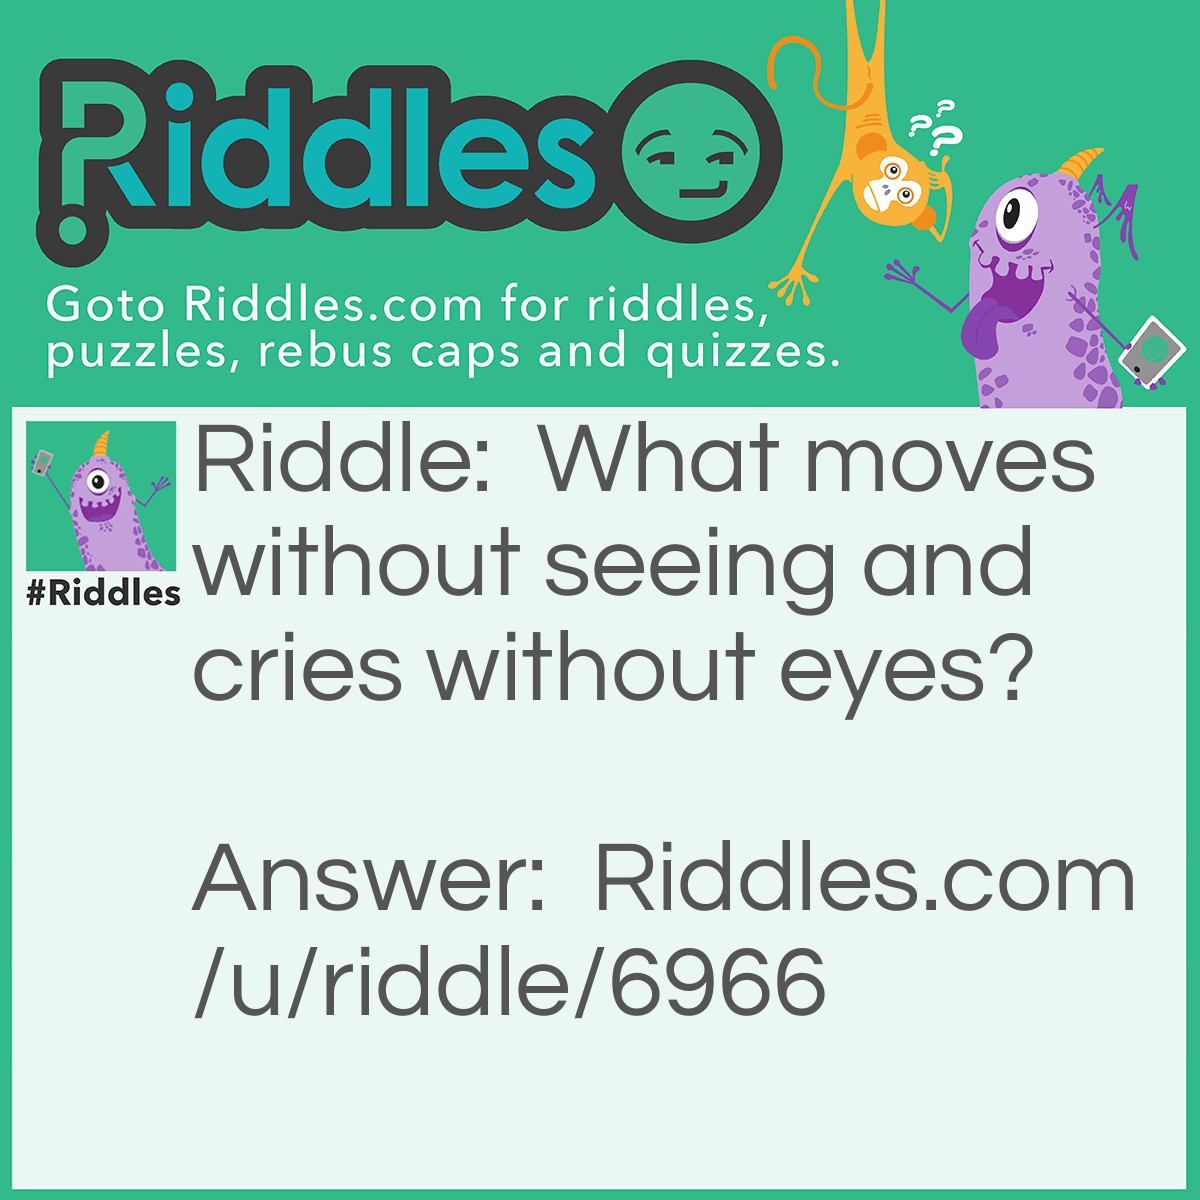 Riddle: What moves without seeing and cries without eyes? Answer: A cloud.